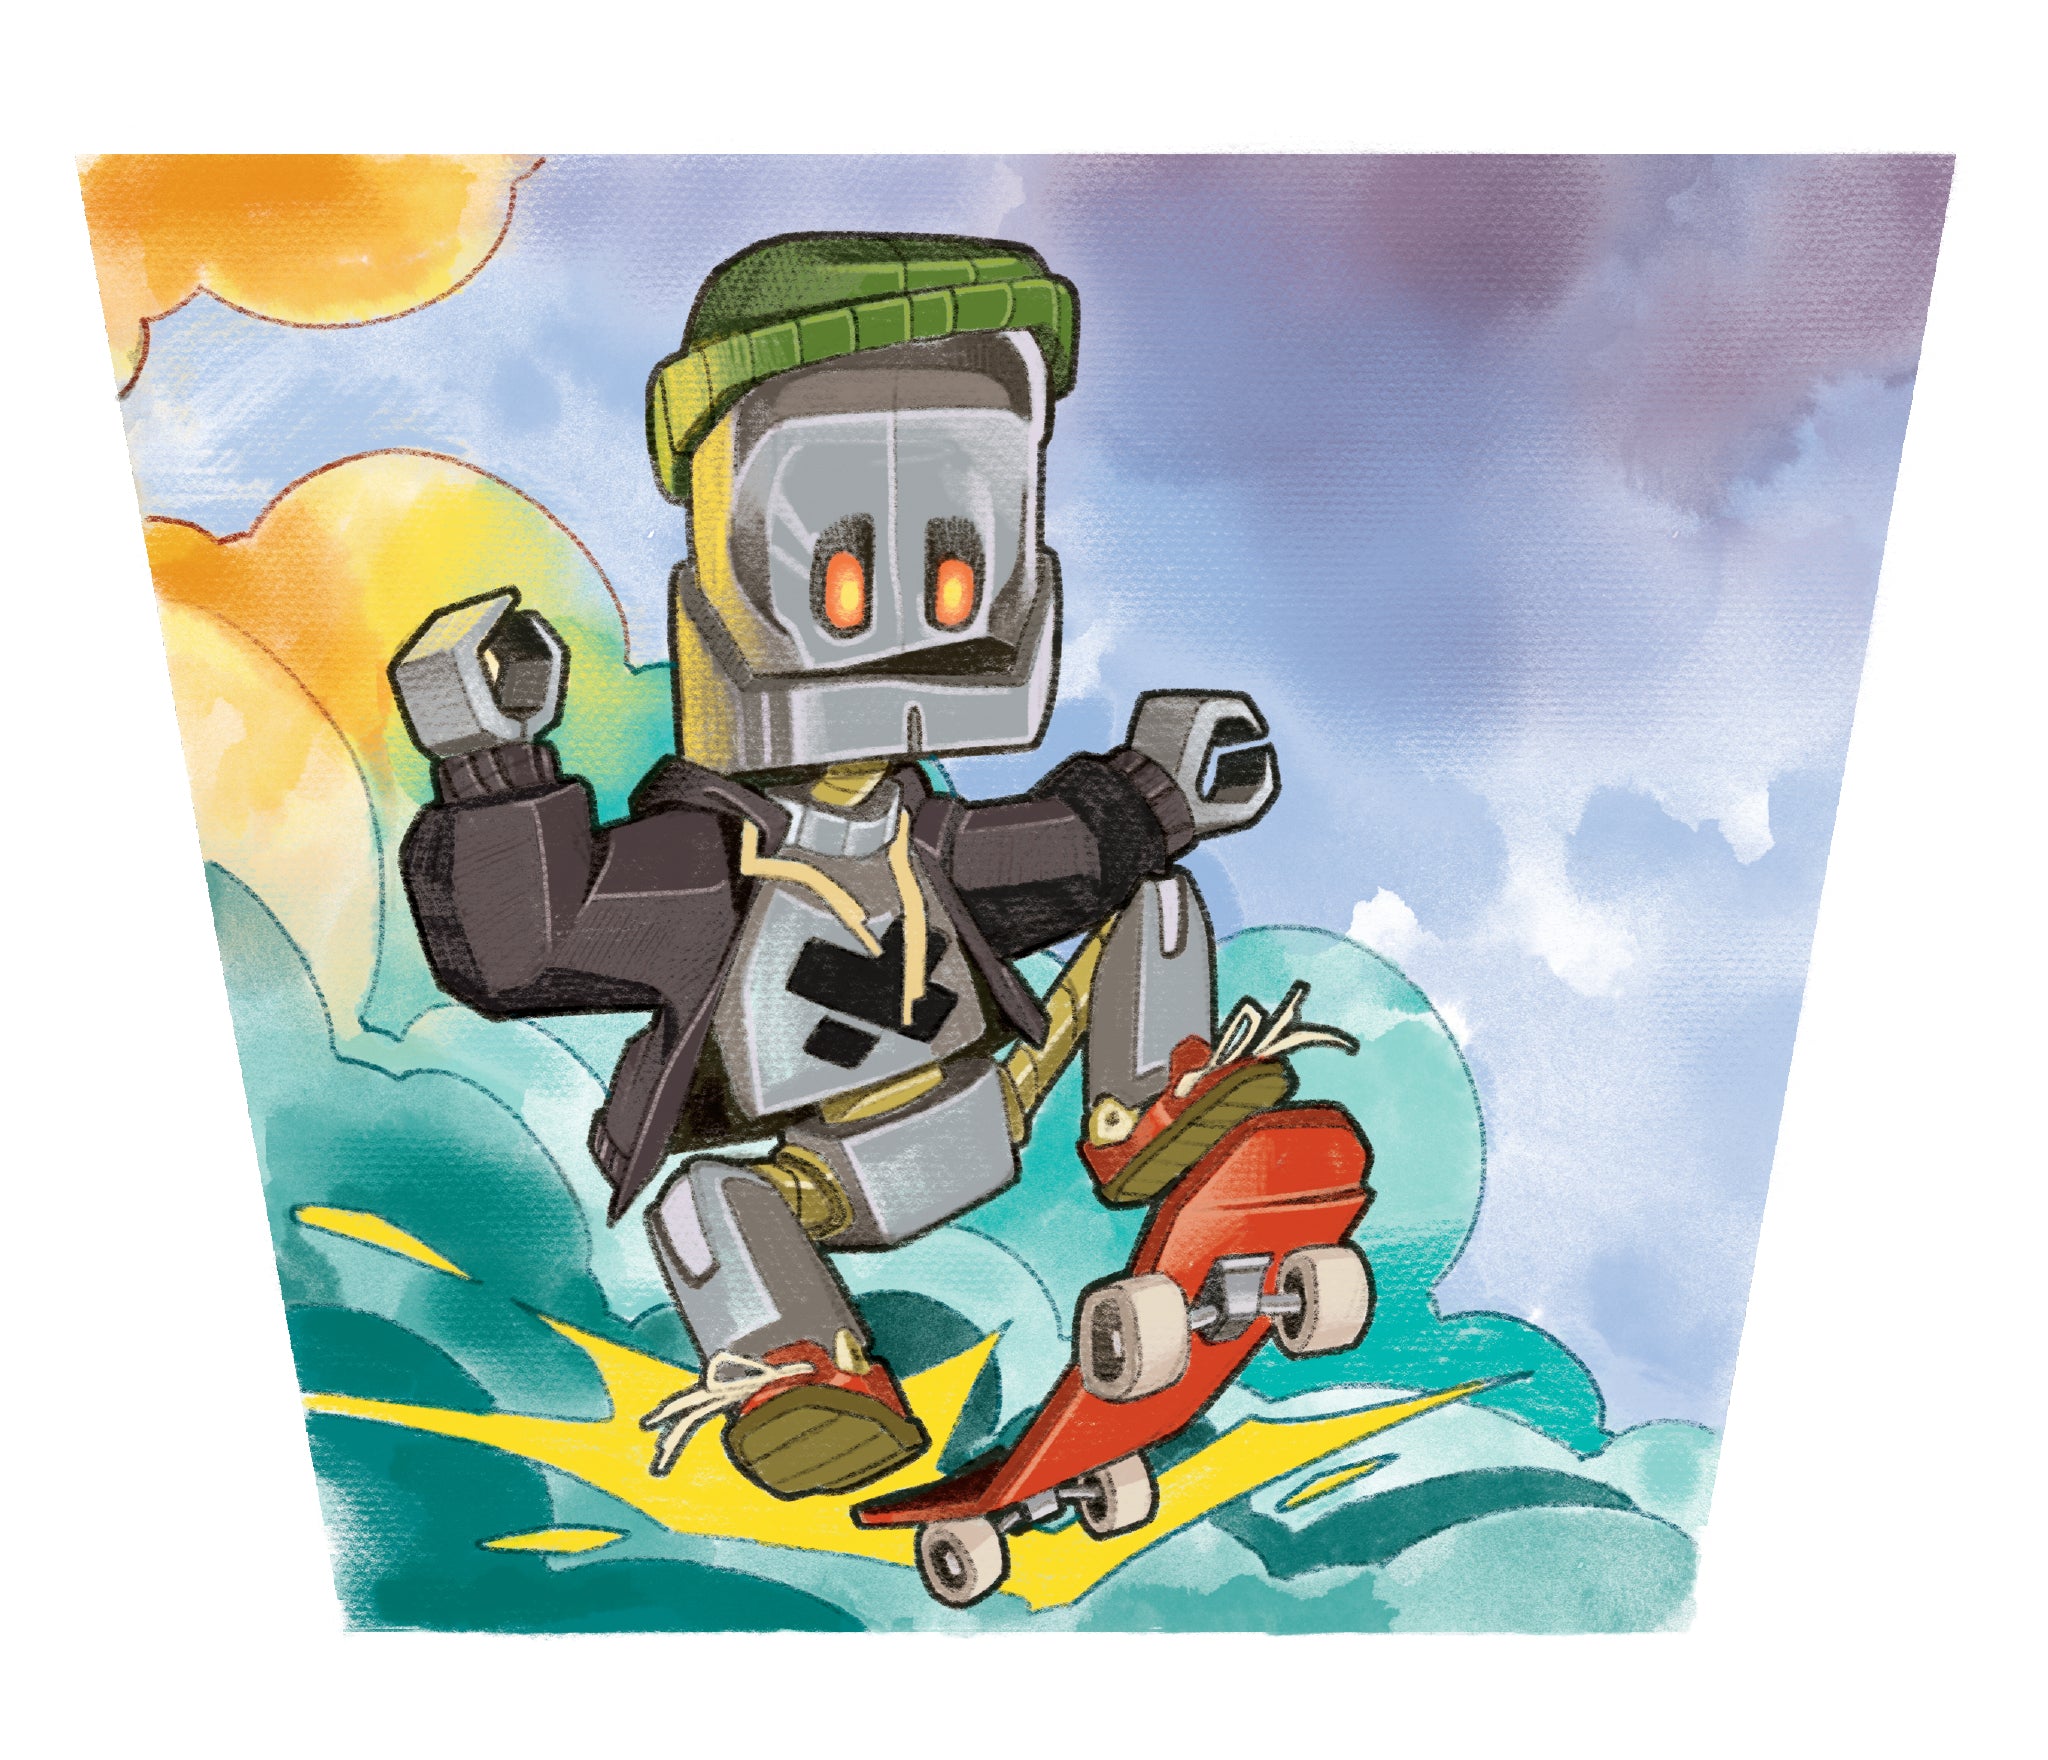 This design shows a robot on a skateboard for our temporary tattoo sleeve for kids.